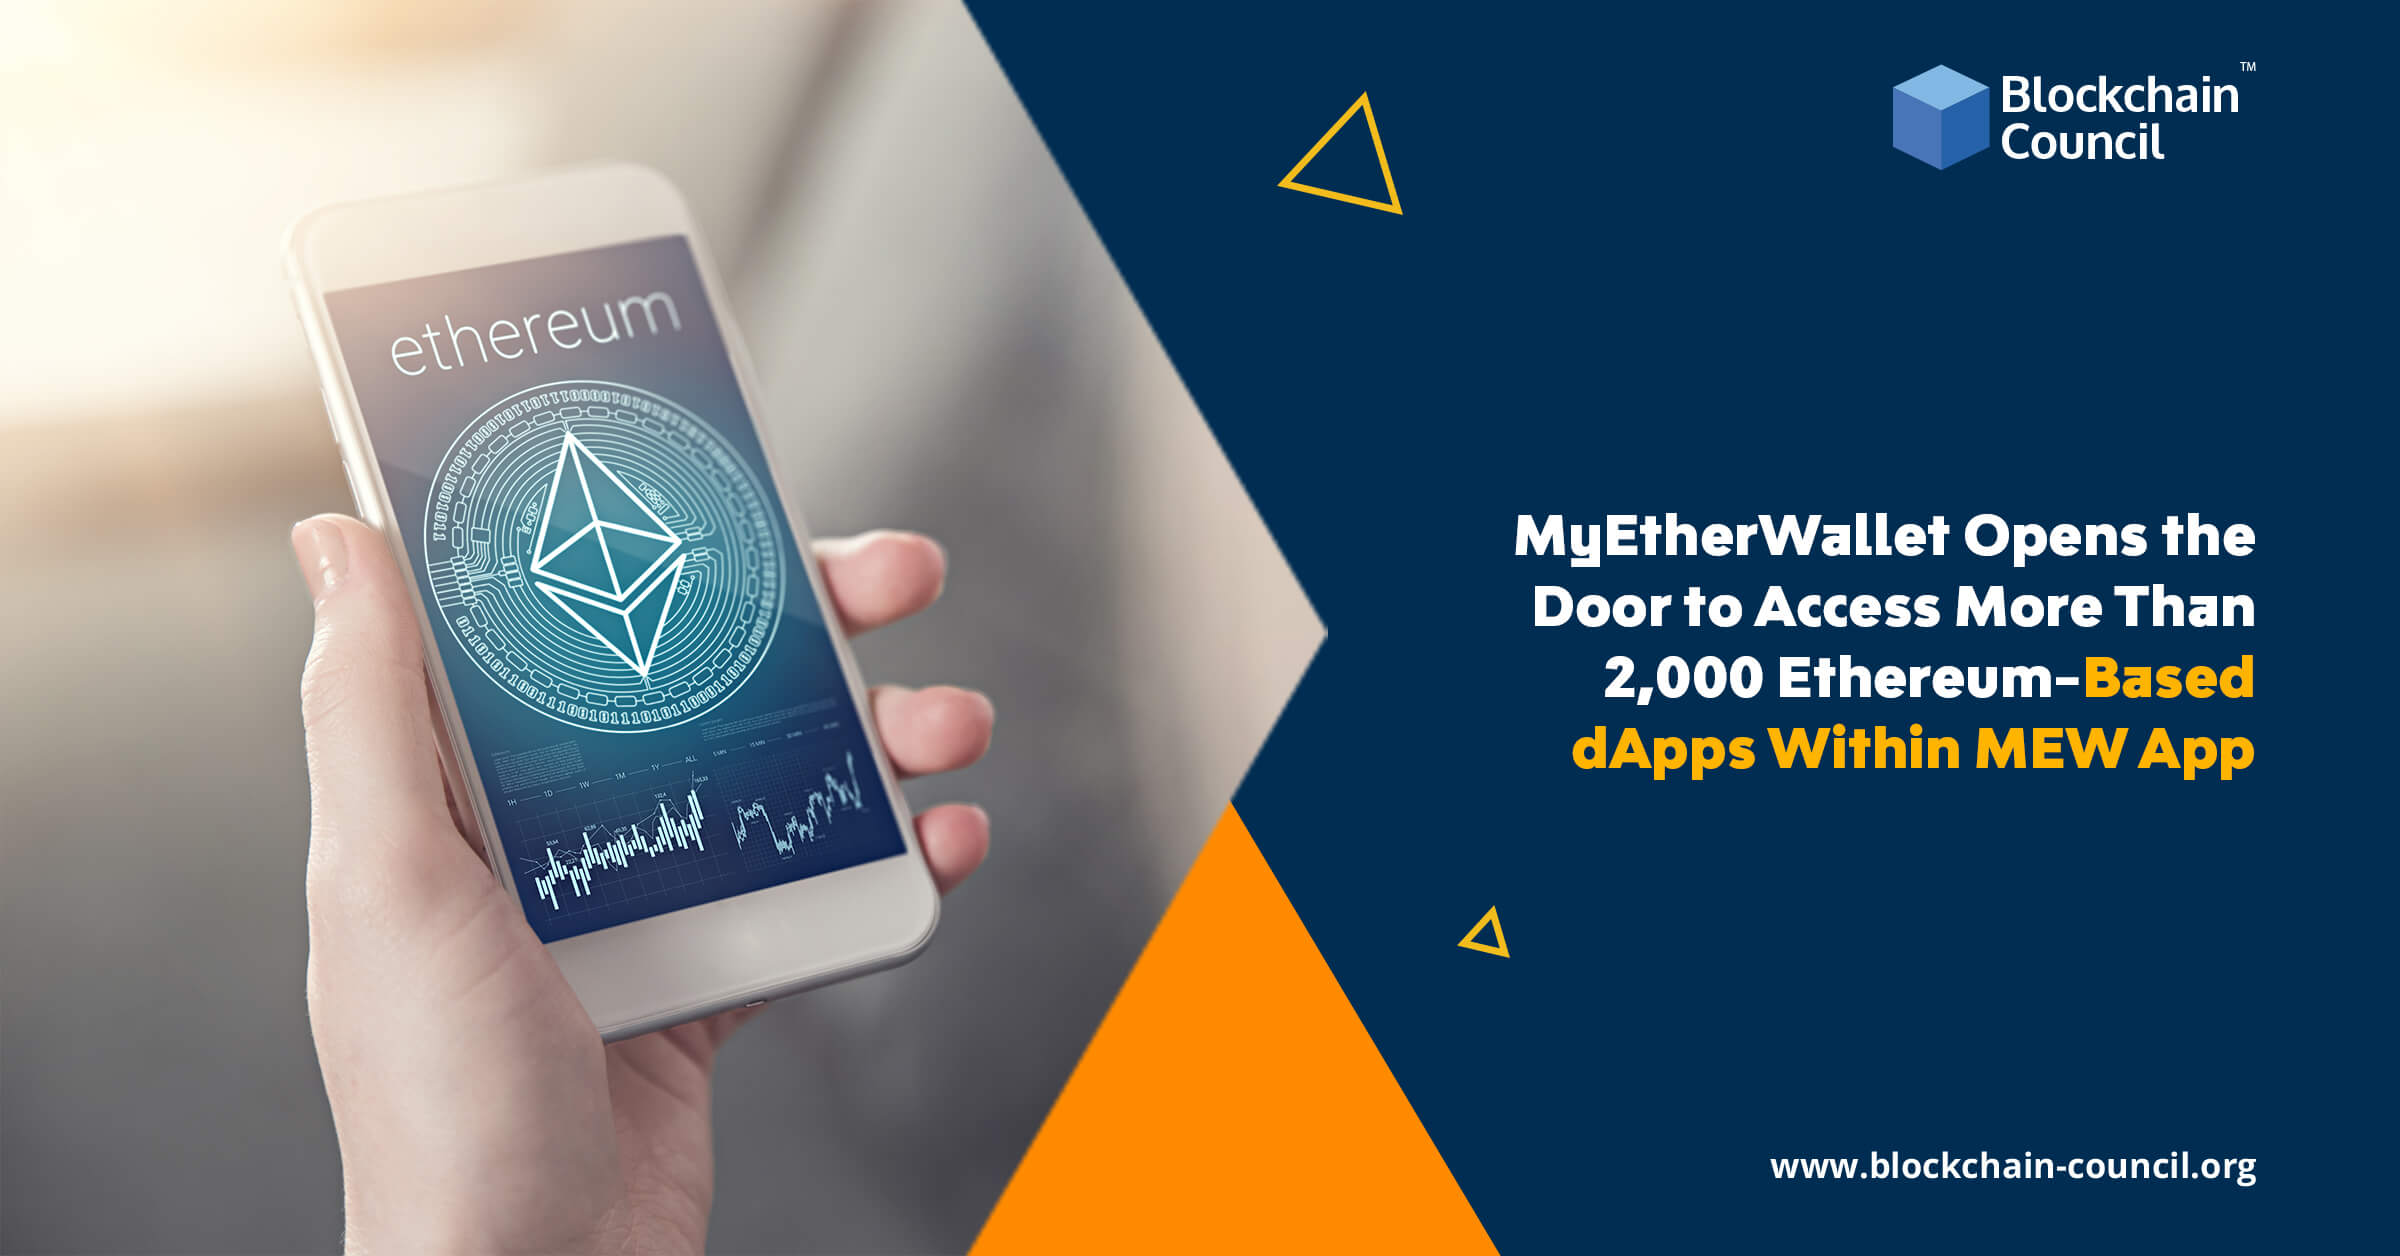 MyEtherWallet Opens the Door to Access More Than 2,000 Ethereum-Based dApps Within MEW App